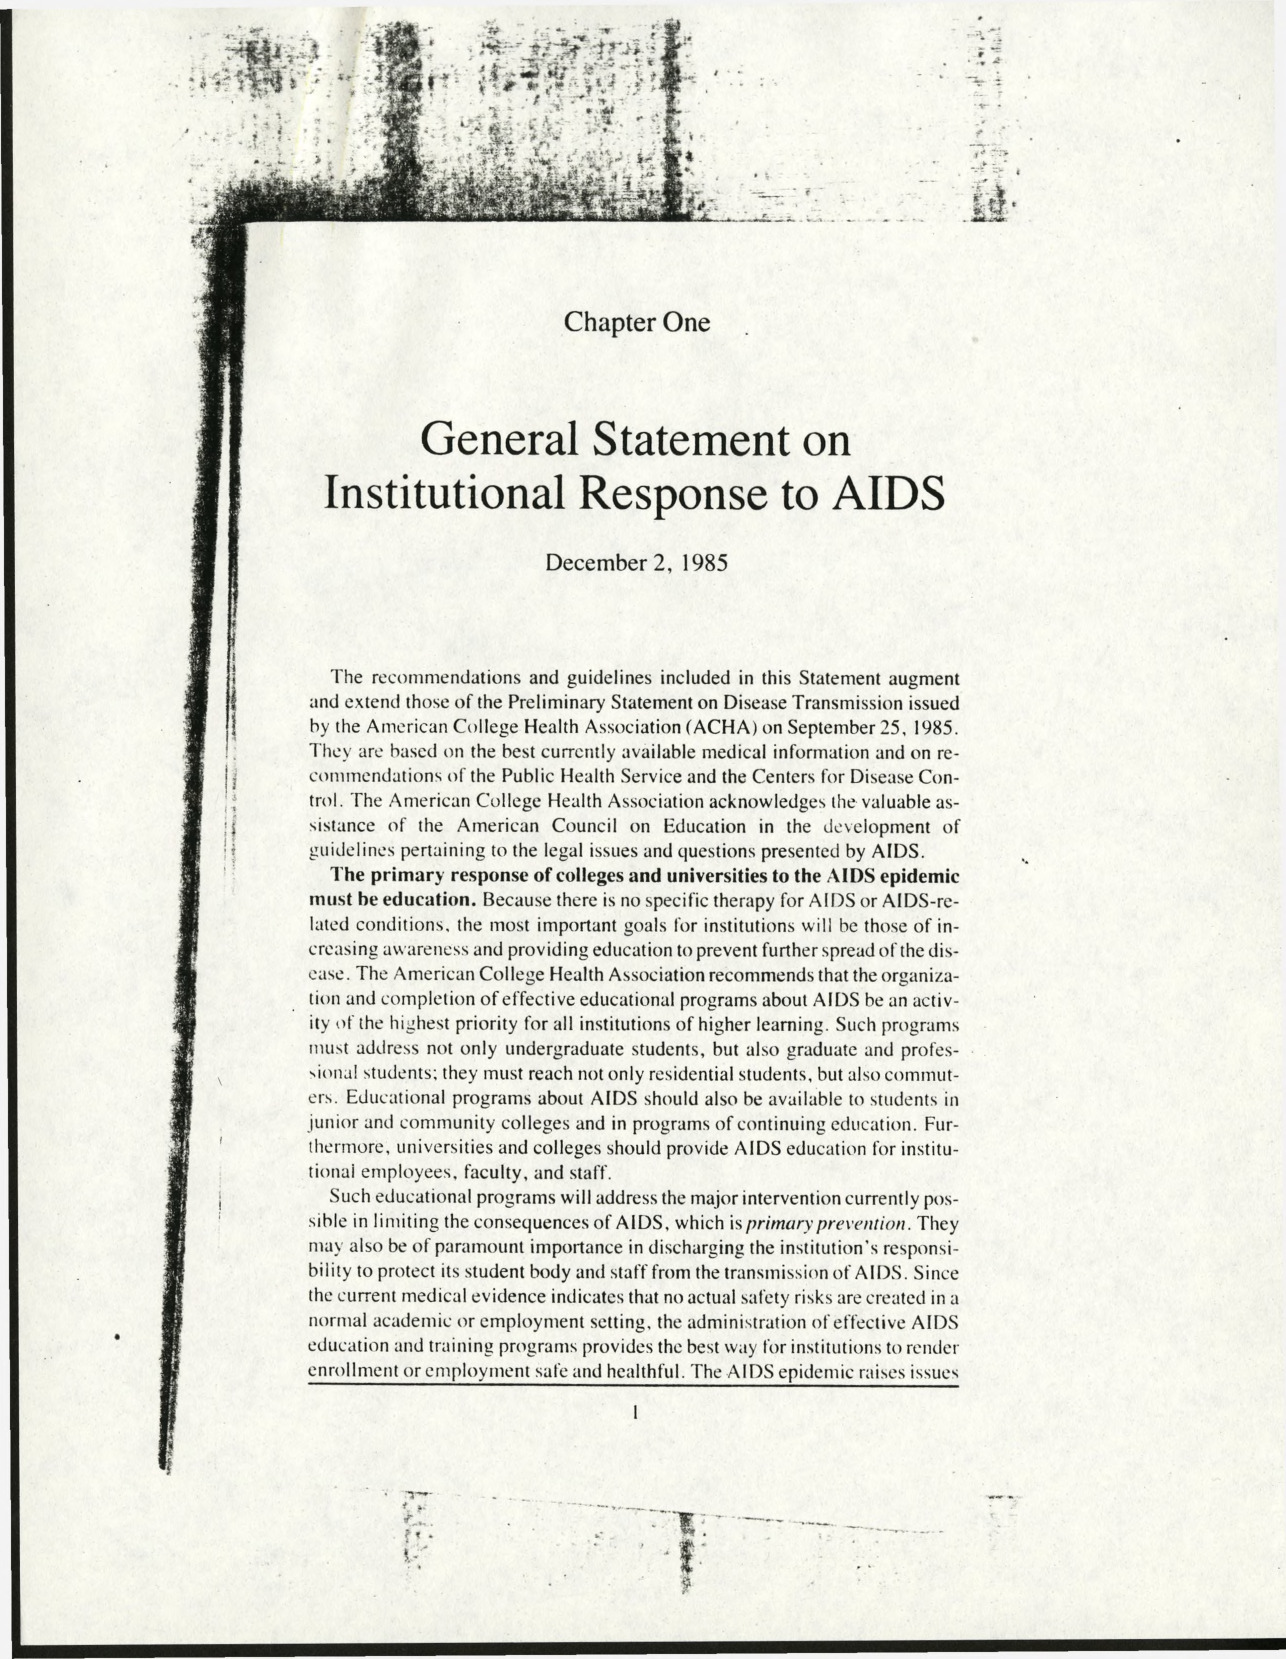 General Statement on Institutional Response to AIDS